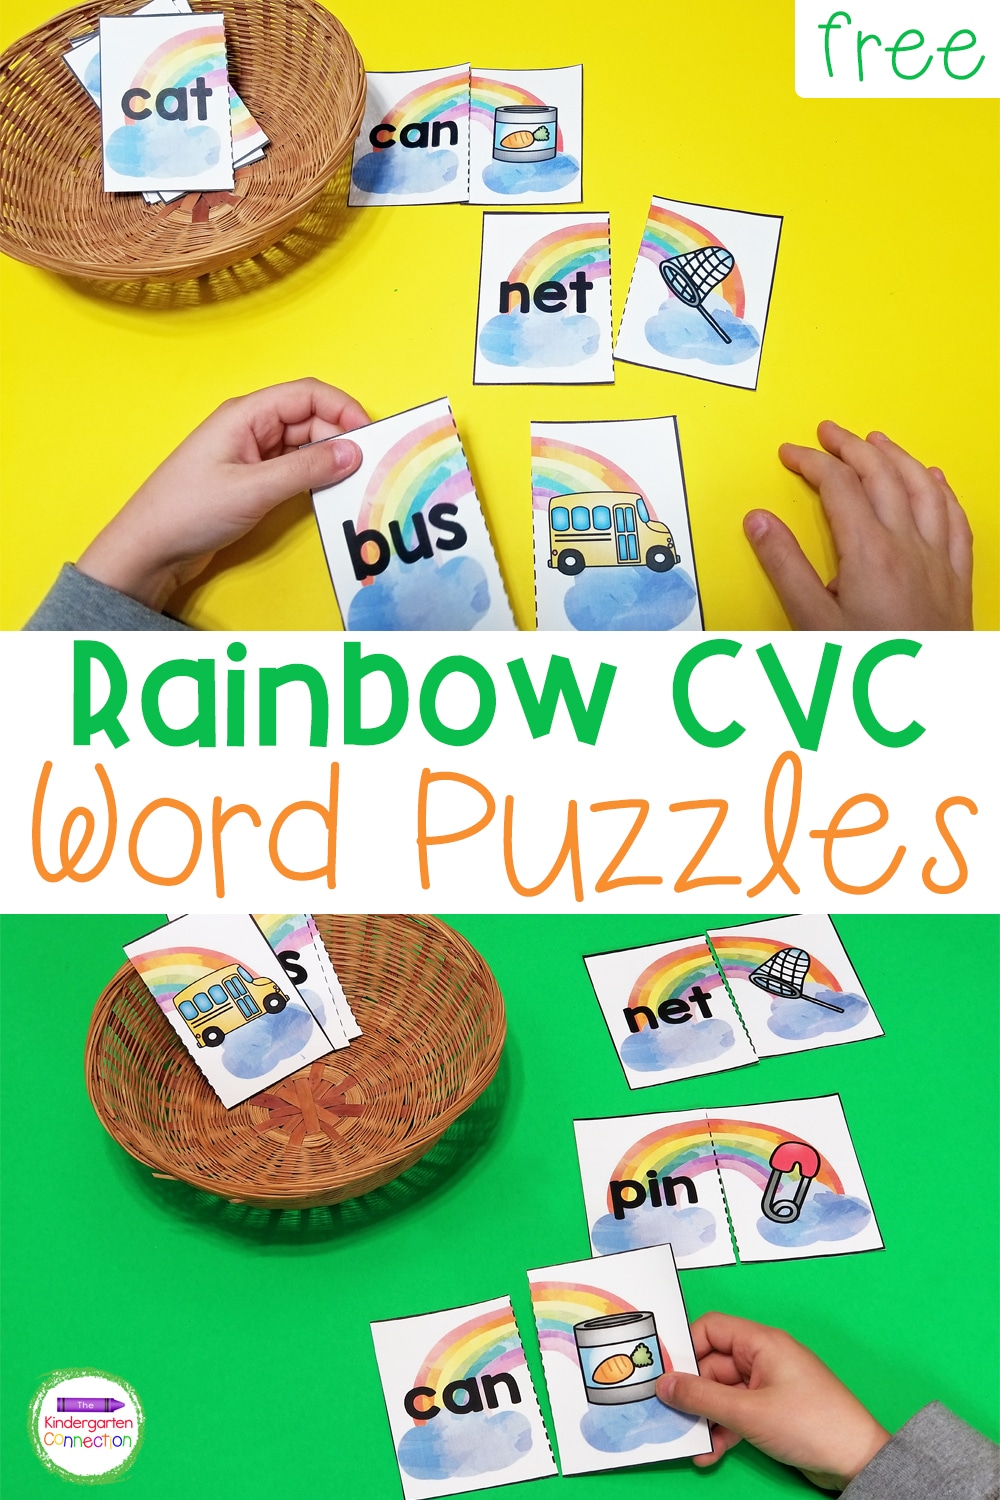 These FREE Printable Rainbow CVC Word Puzzles are so much fun! They're great for your kindergarten literacy center!